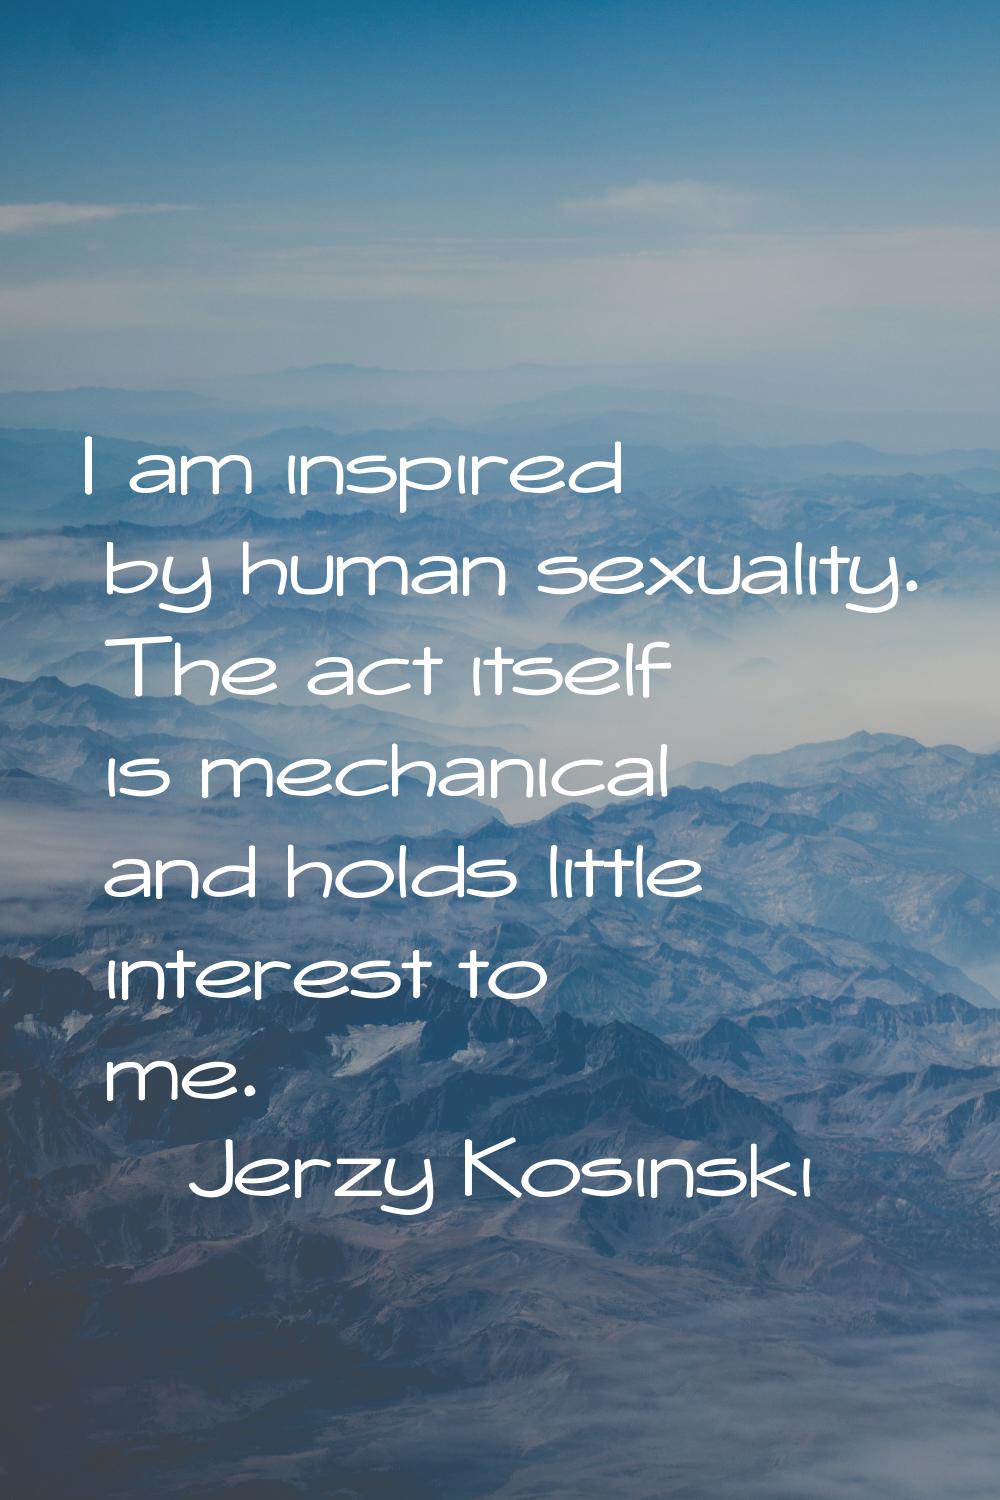 I am inspired by human sexuality. The act itself is mechanical and holds little interest to me.